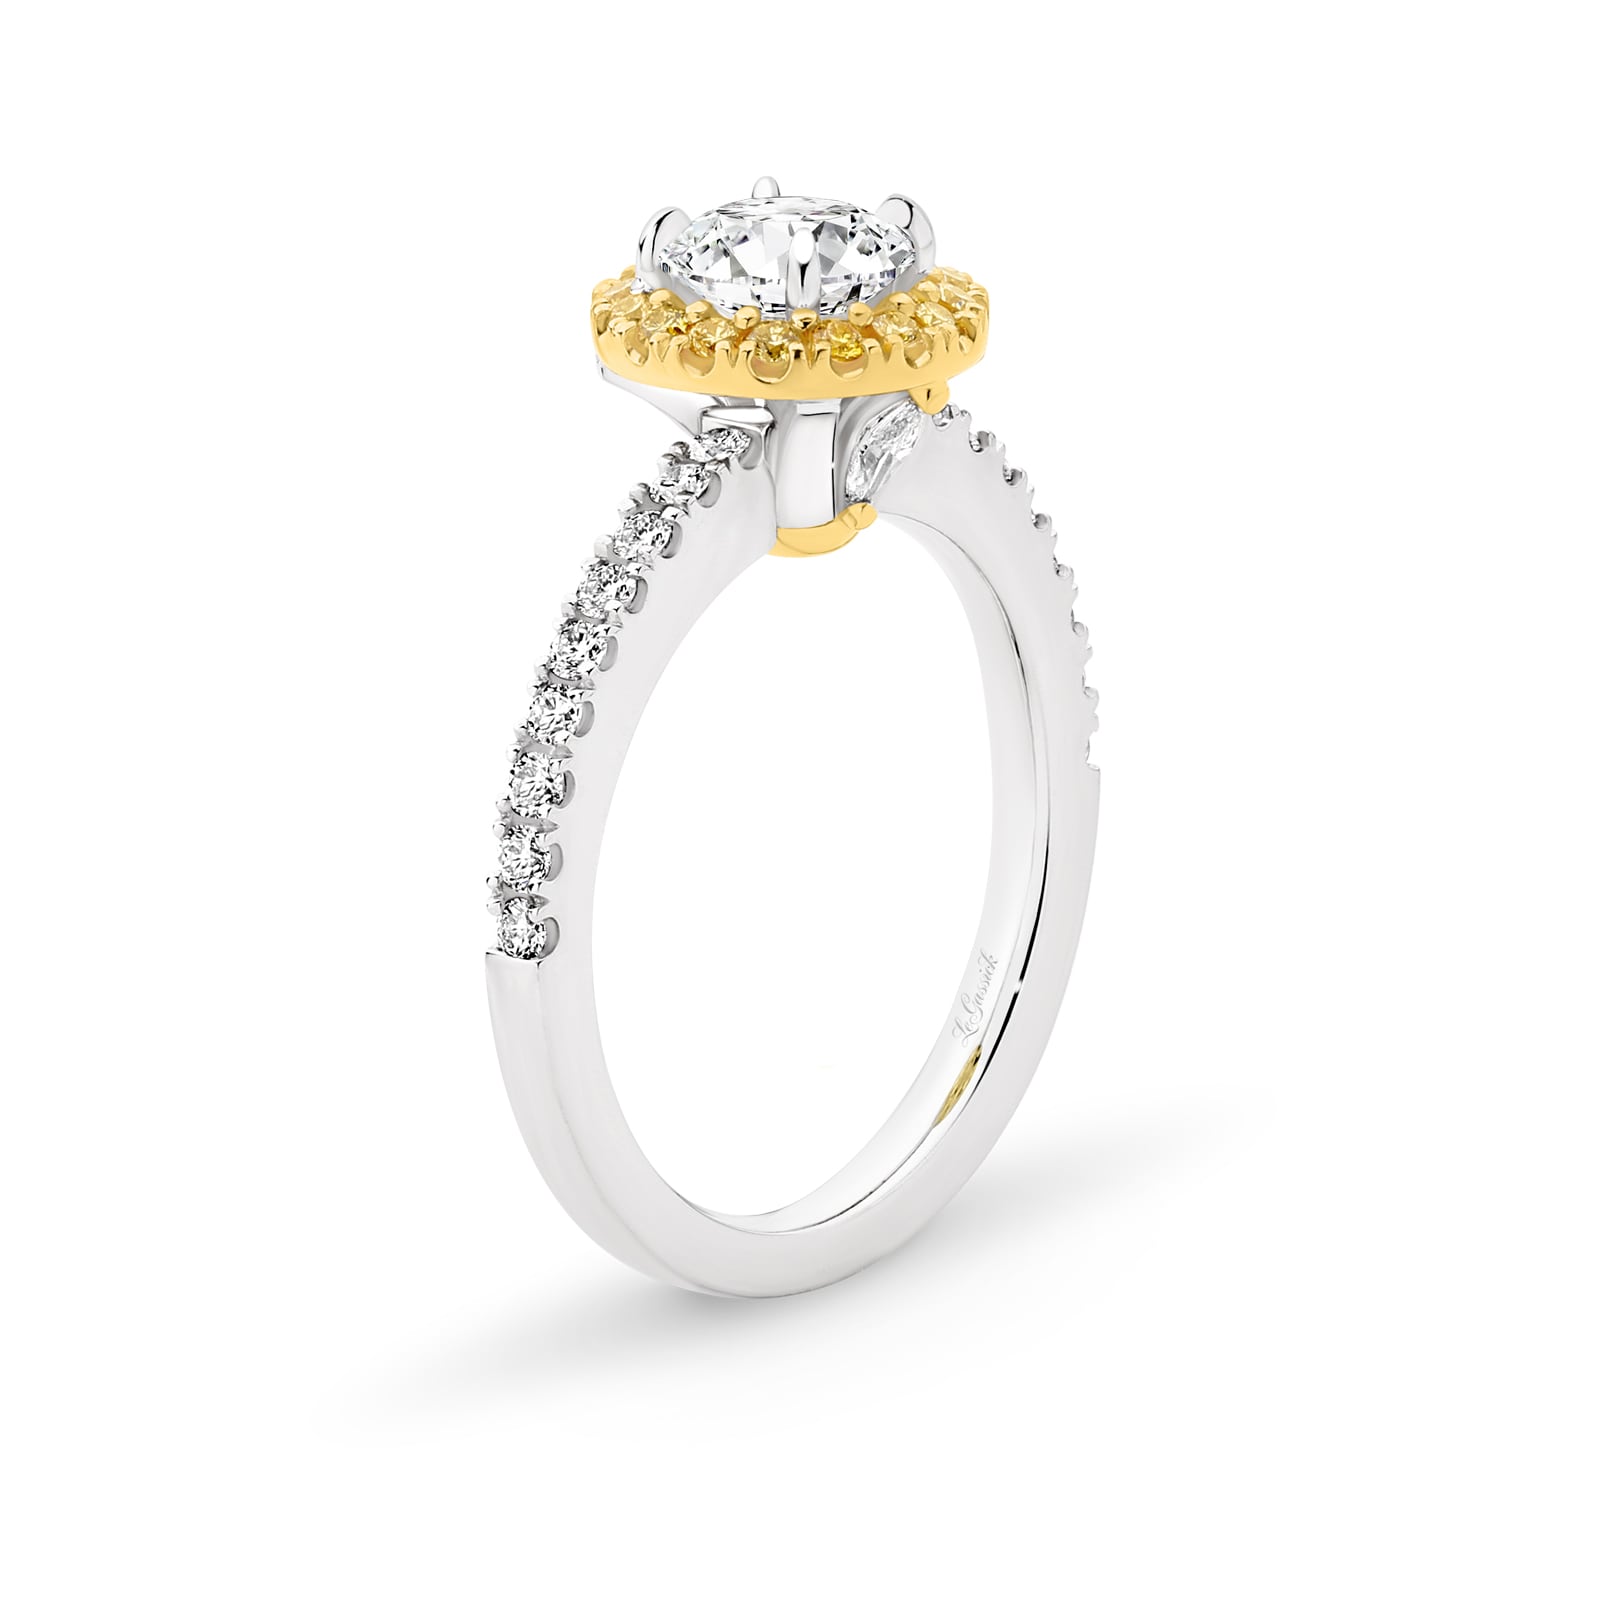 Lucy is a stunning 1 carat white diamond ring with a yellow diamond halo. Part of the Beyond Luxury Collection from LeGassick.